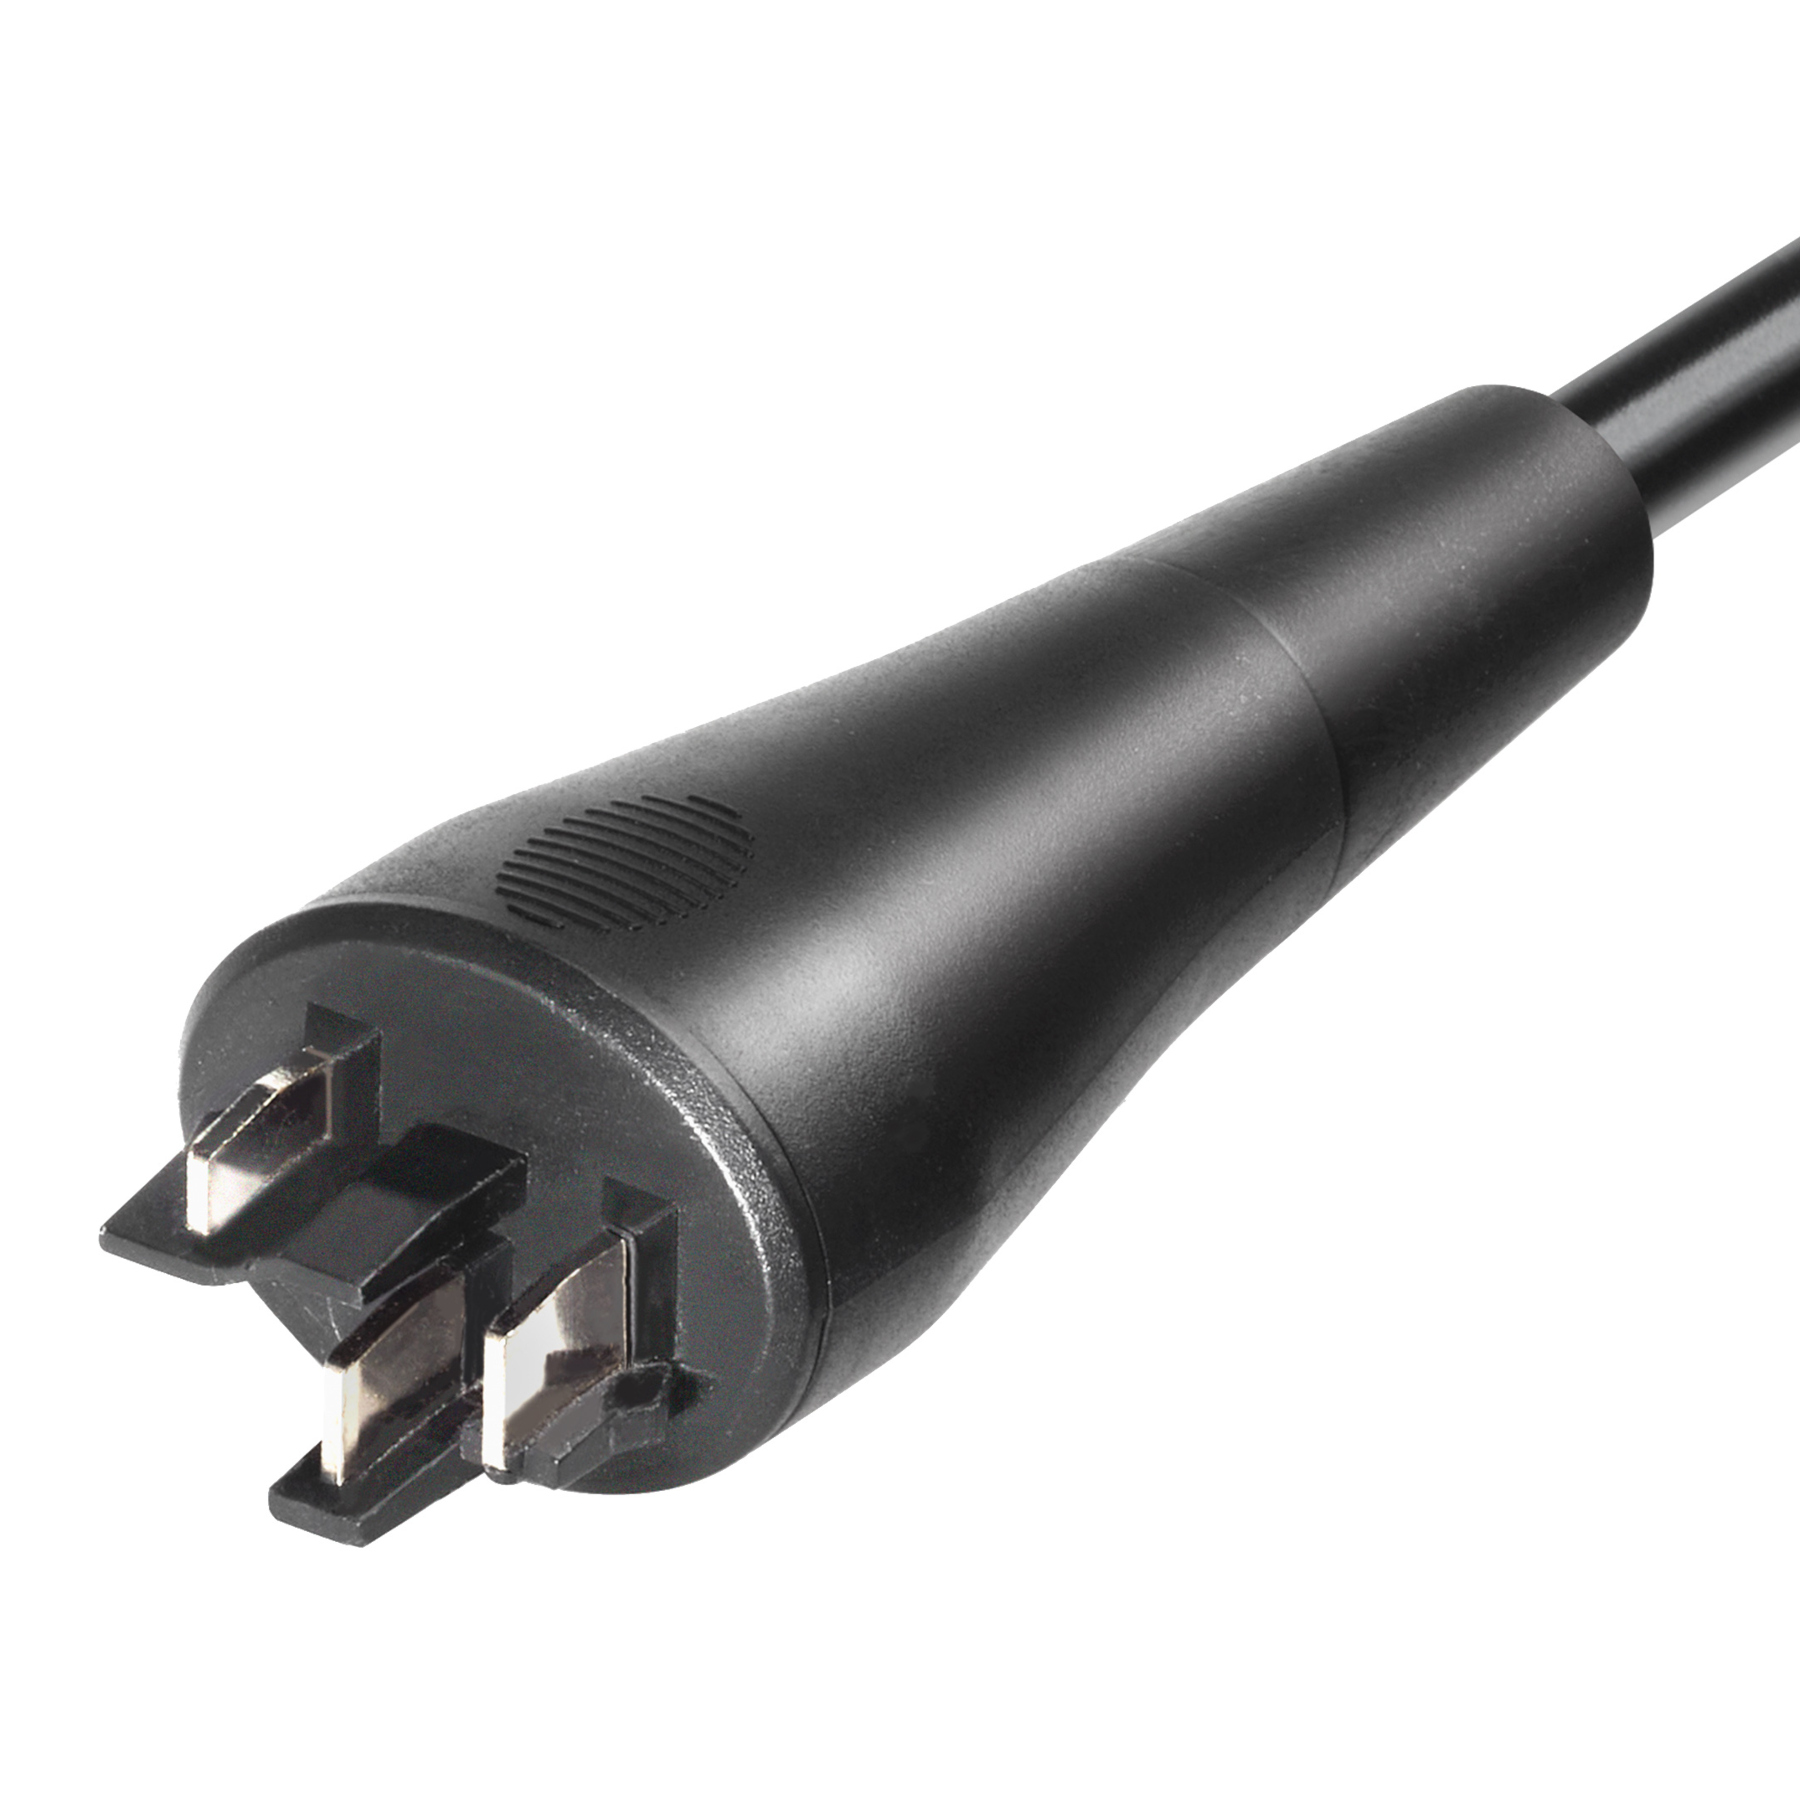 Productfoto van ONgineer Secondary Cable for LiON Smart Charger - Bosch compatible